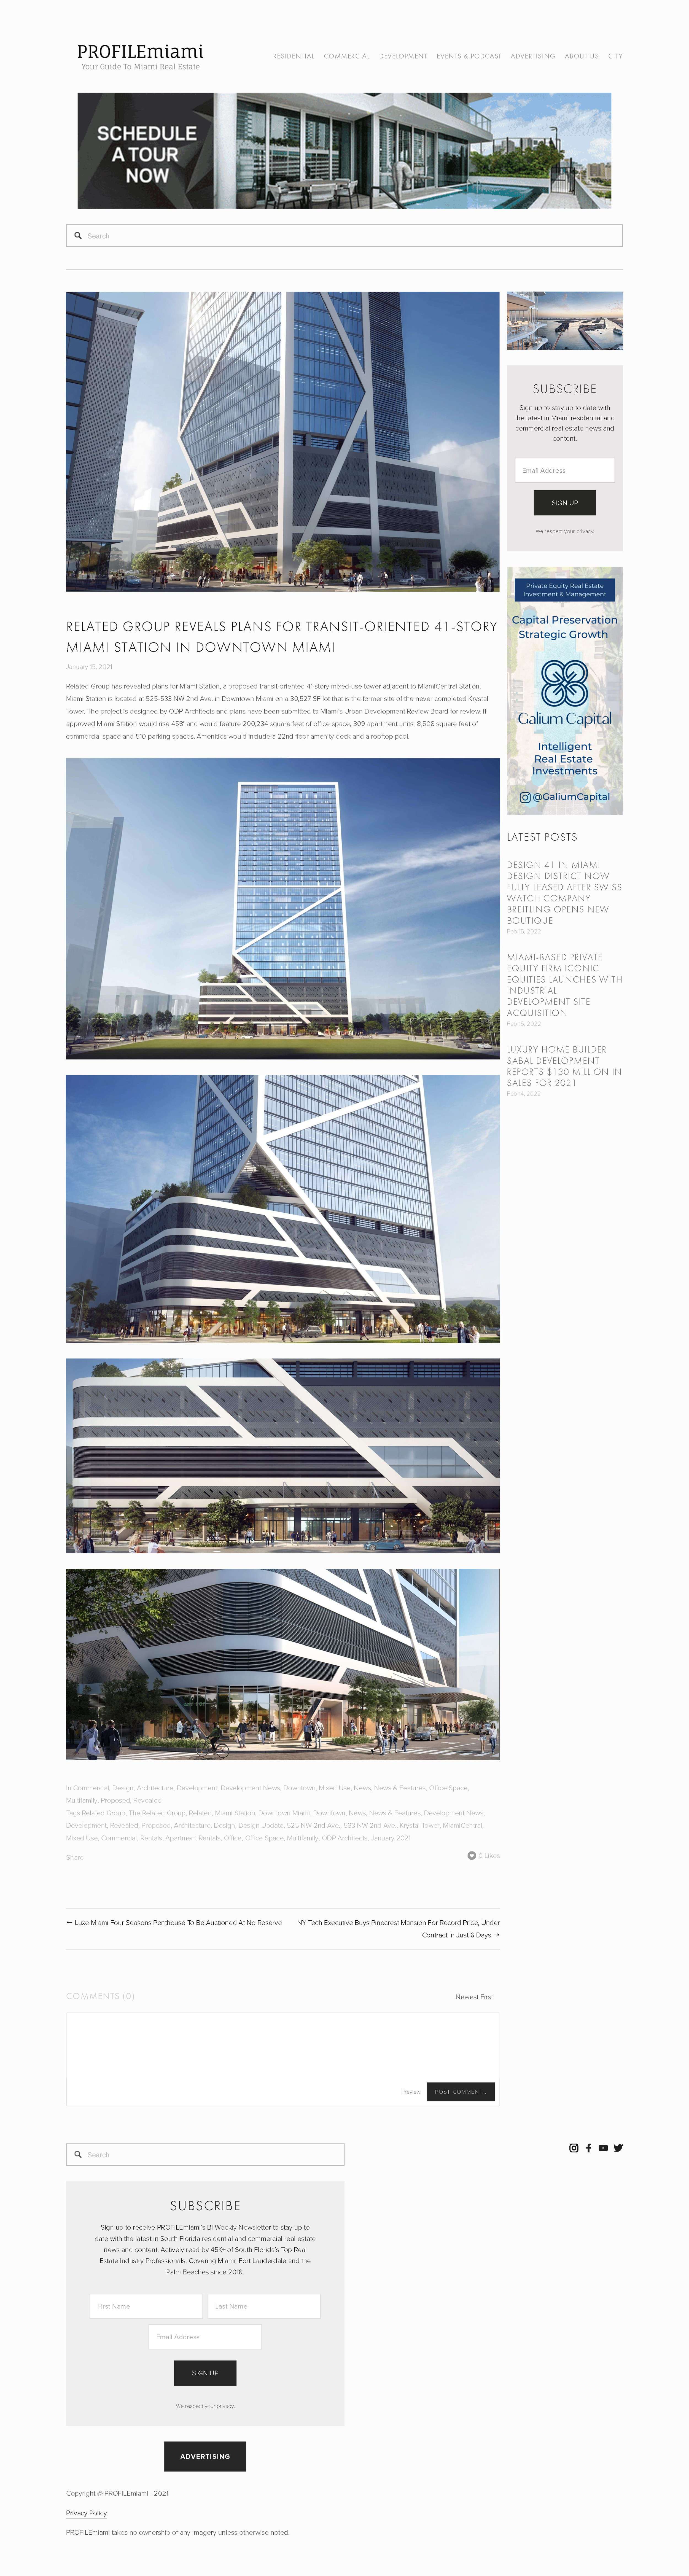 Related Group Reveals Plans For Transit-Oriented 41-Story Miami Station In Downtown Miami — PROFILE .png